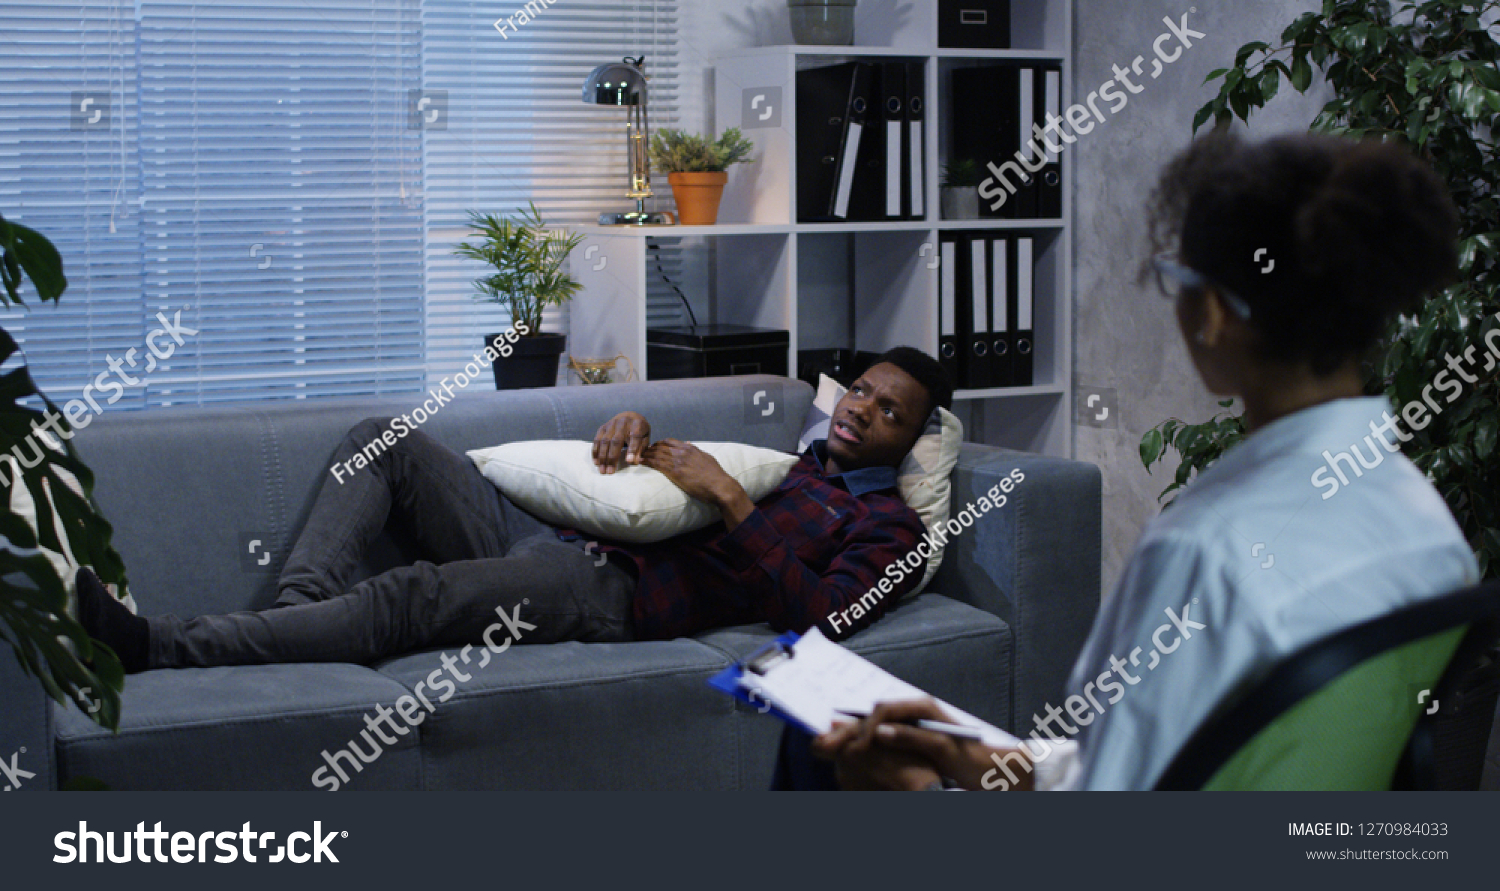 Medium shot of young man lying on a couch while talking to a psychologist #1270984033